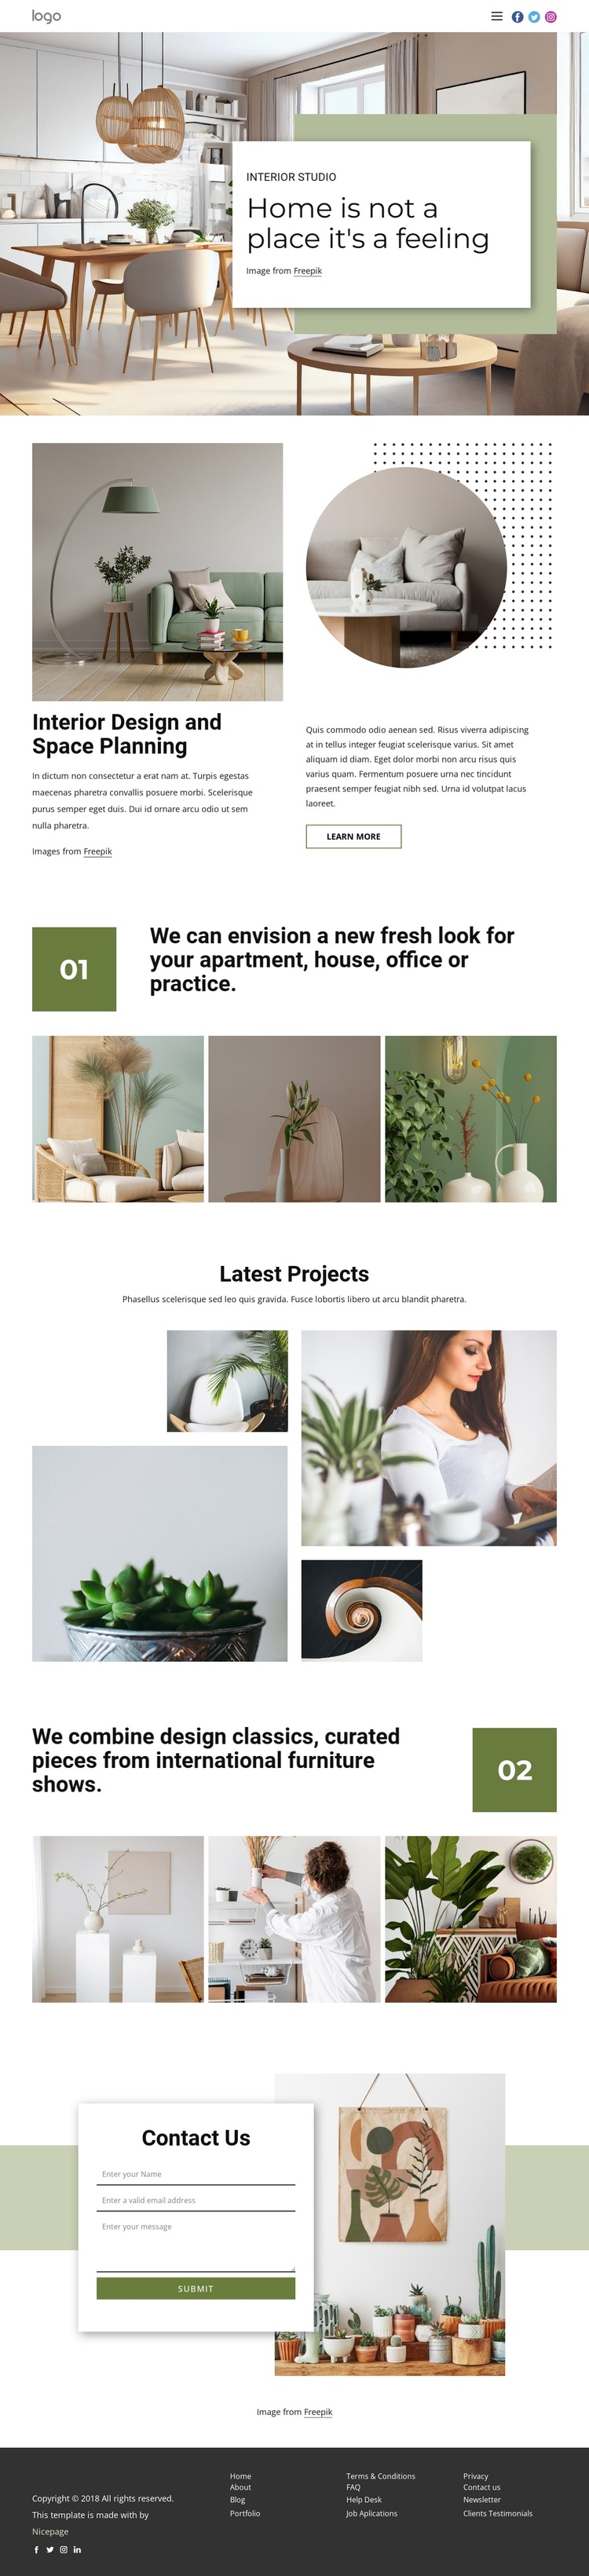 Interior designs for every taste Template